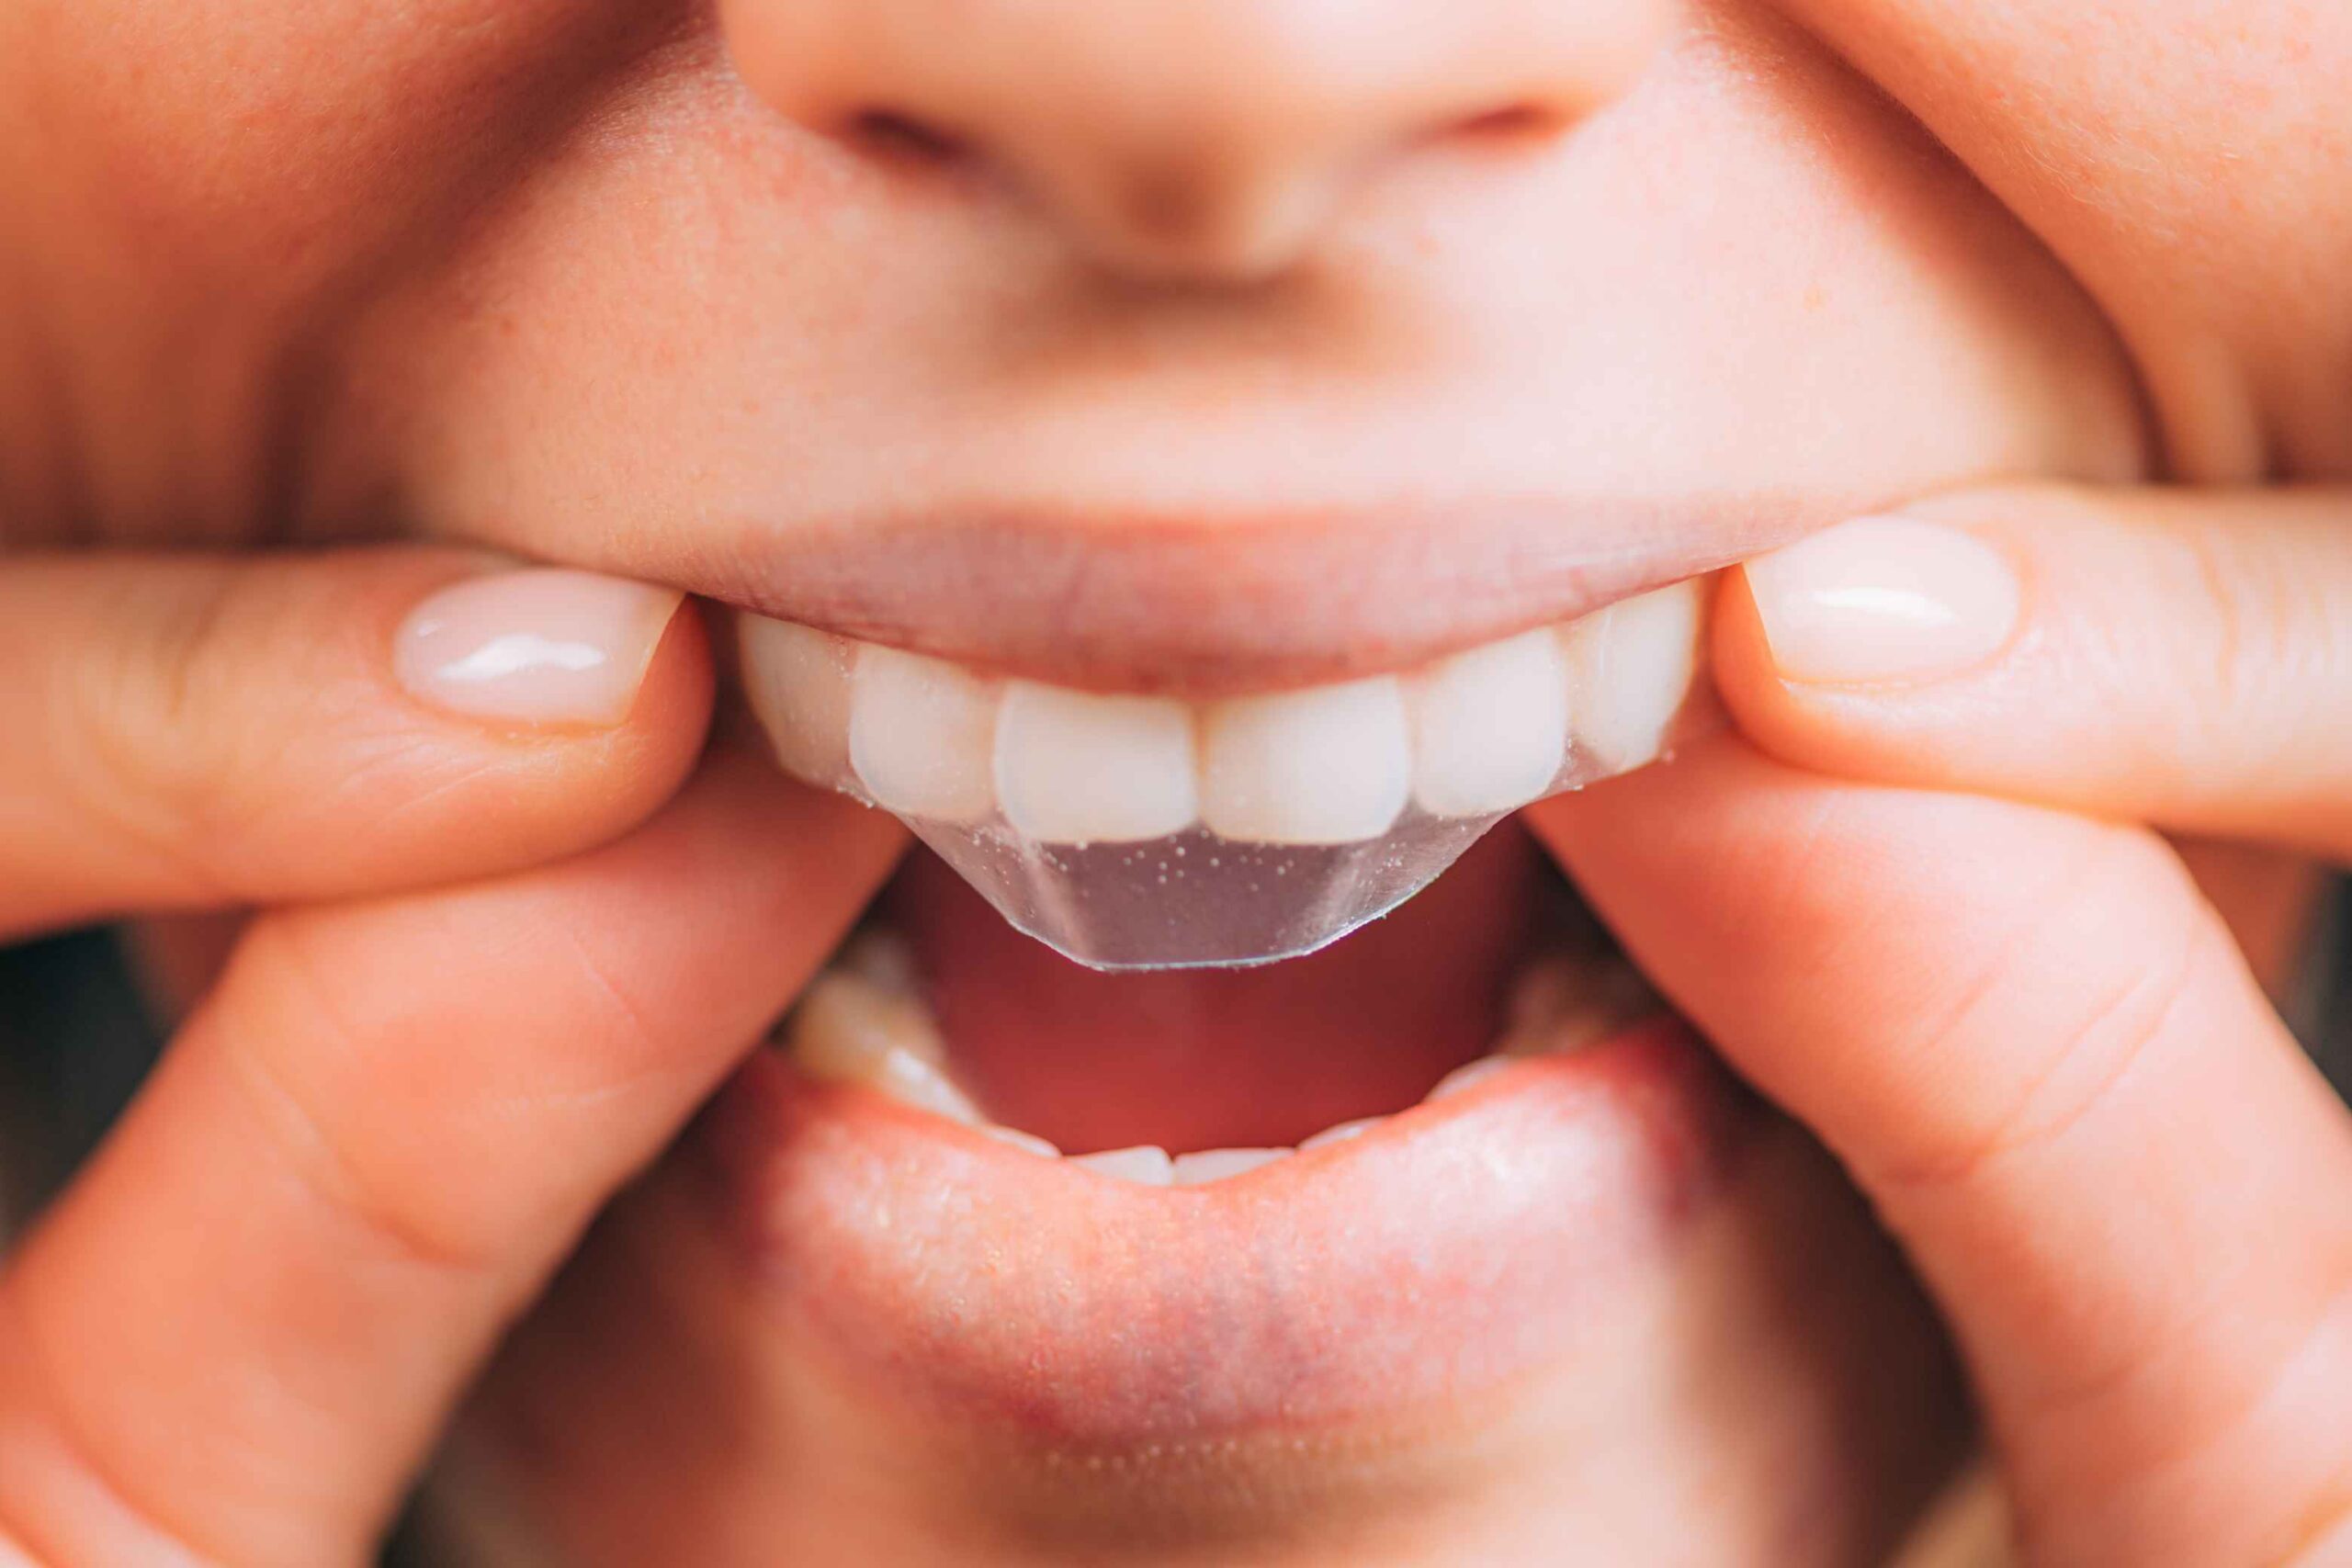 Teeth Whitening Strips: Do They Actually Work?